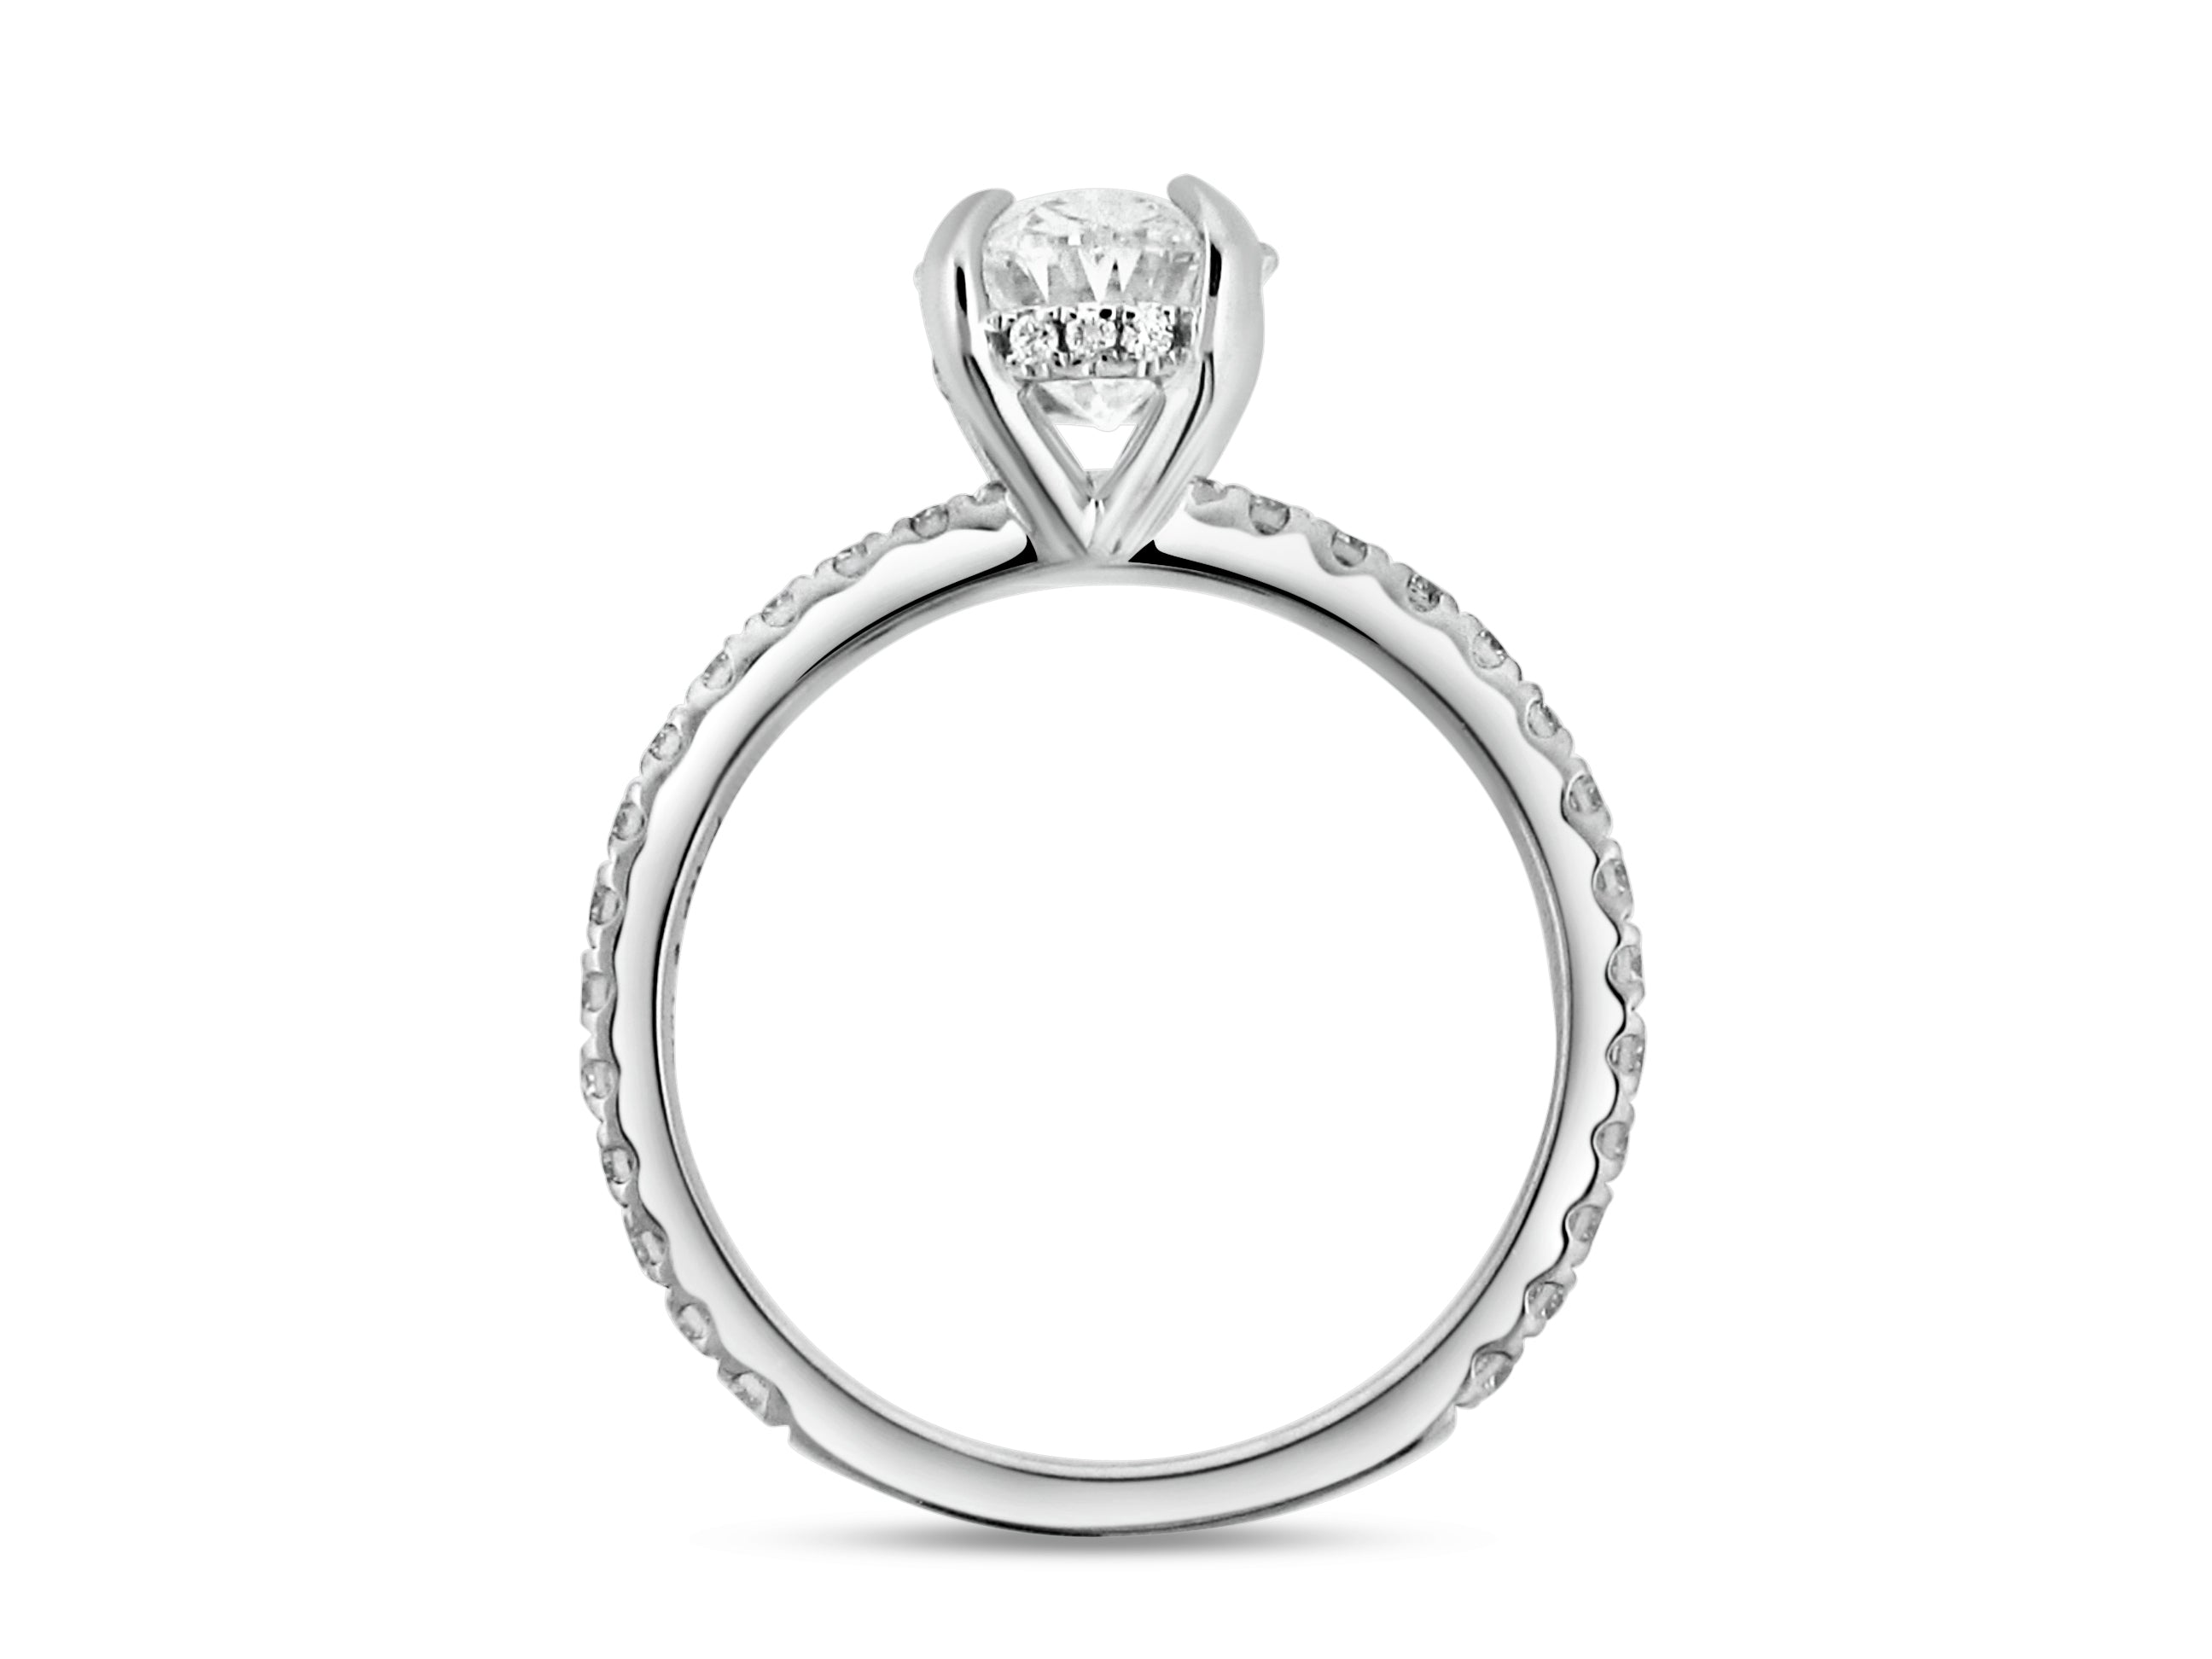 PRIVE' 18K WHITE GOLD 1.94CT SI1 CLARITY AND F COLOR OVAL LAB GROWN SWAROVSKI DIAMOND WITH EXCELLENT CUT AND CERTIFIED.  SURROUNDED BY .43CT SI1/G NATURAL ACCENT DIAMONDS